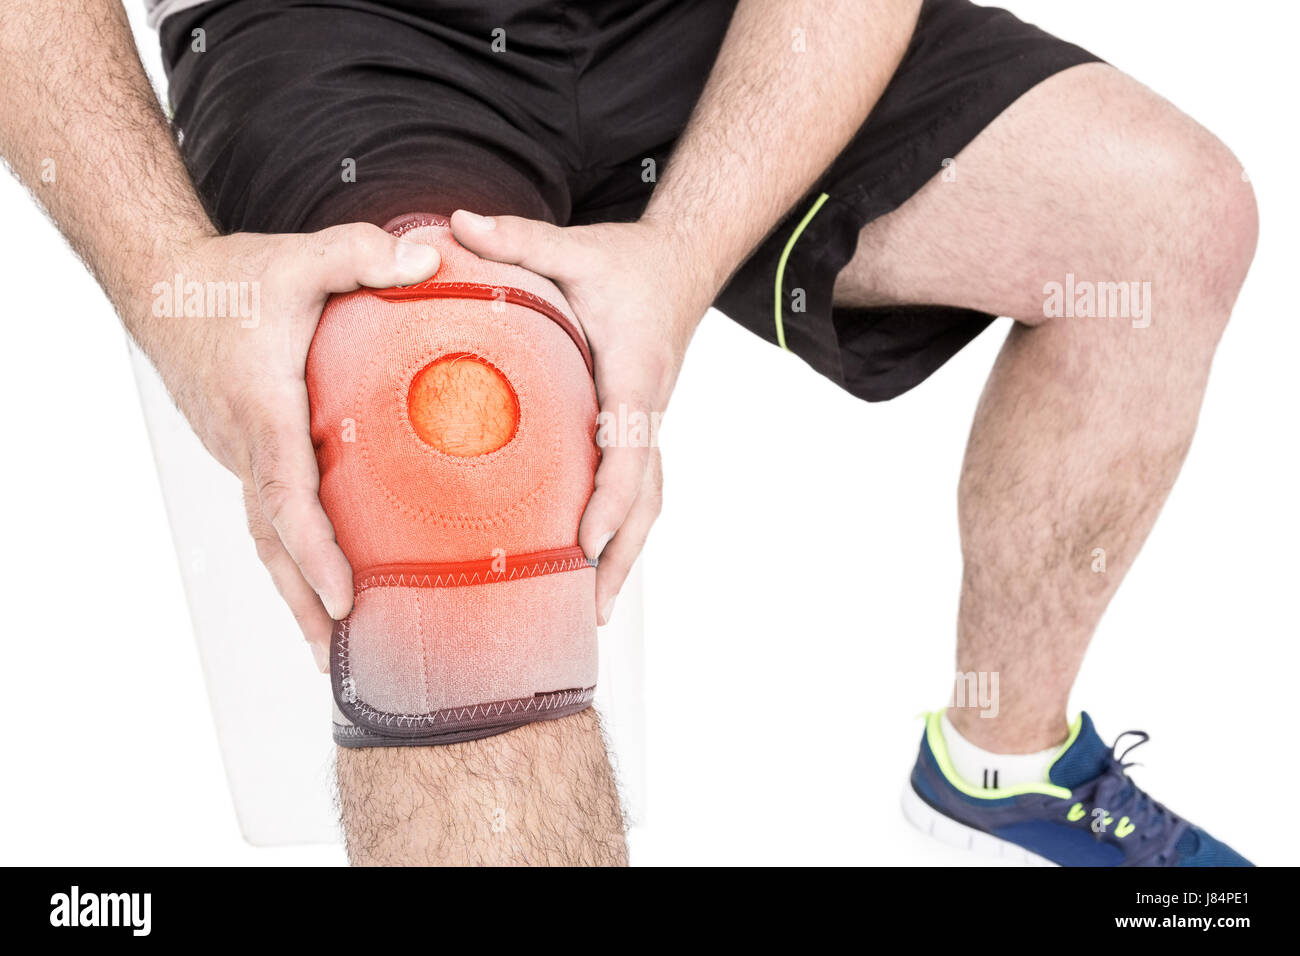 Digitally composite image of man suffering with knee inflammation Stock Photo